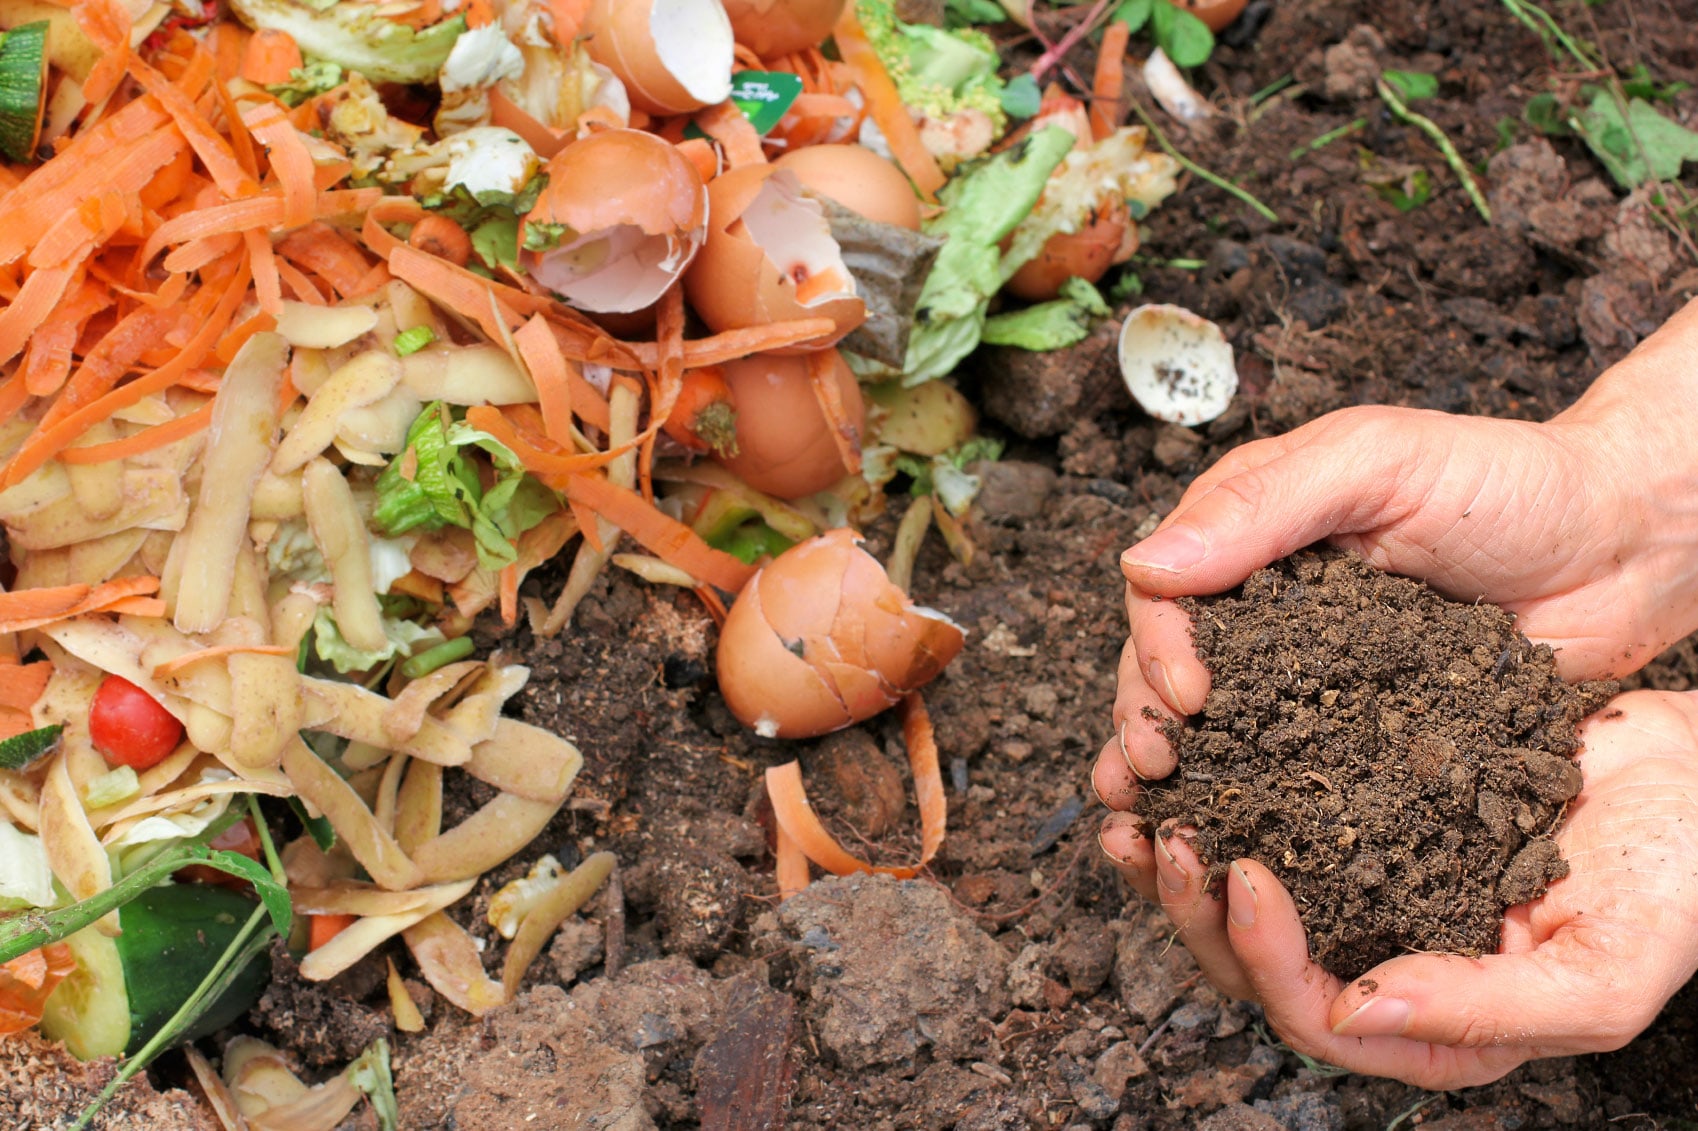 Dispose of organic waste in pots,make compost,use it in kitchen garden